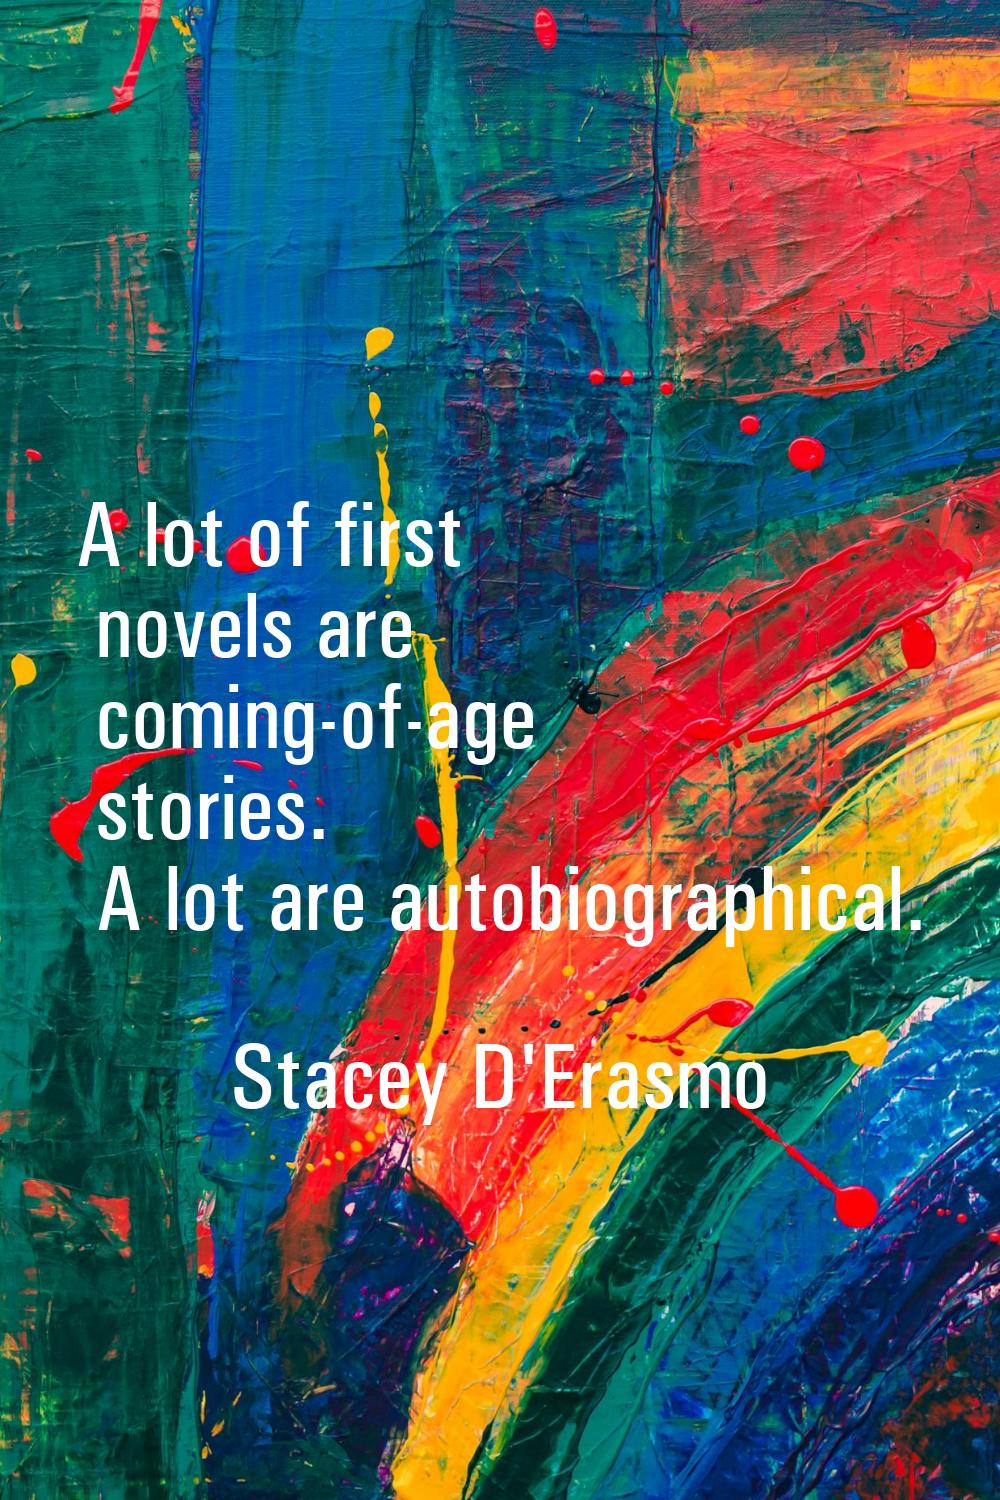 A lot of first novels are coming-of-age stories. A lot are autobiographical.